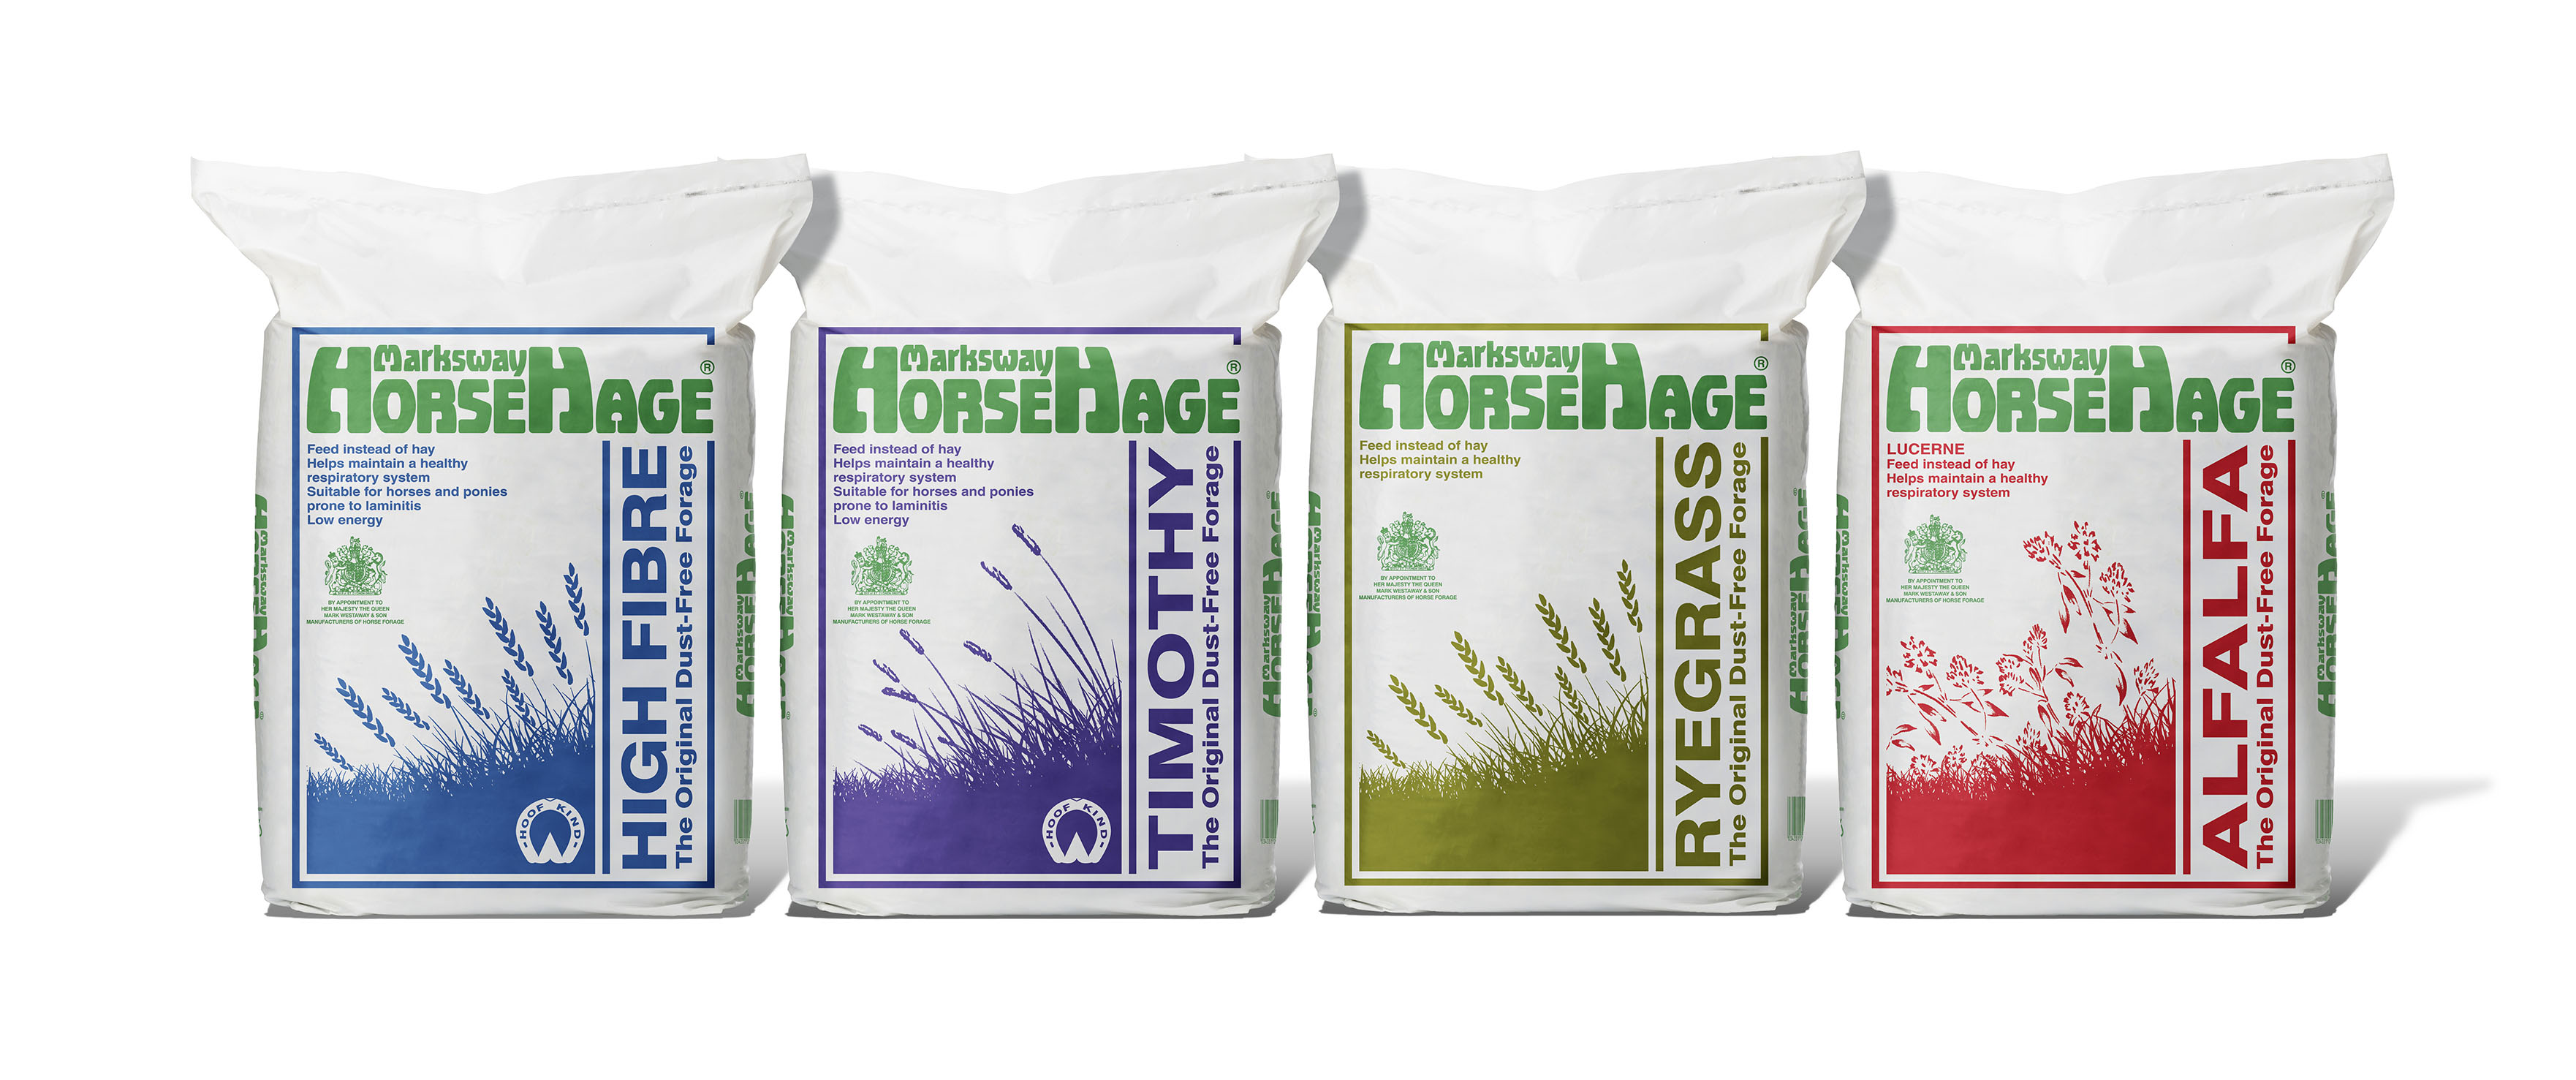 horsehage products group shot